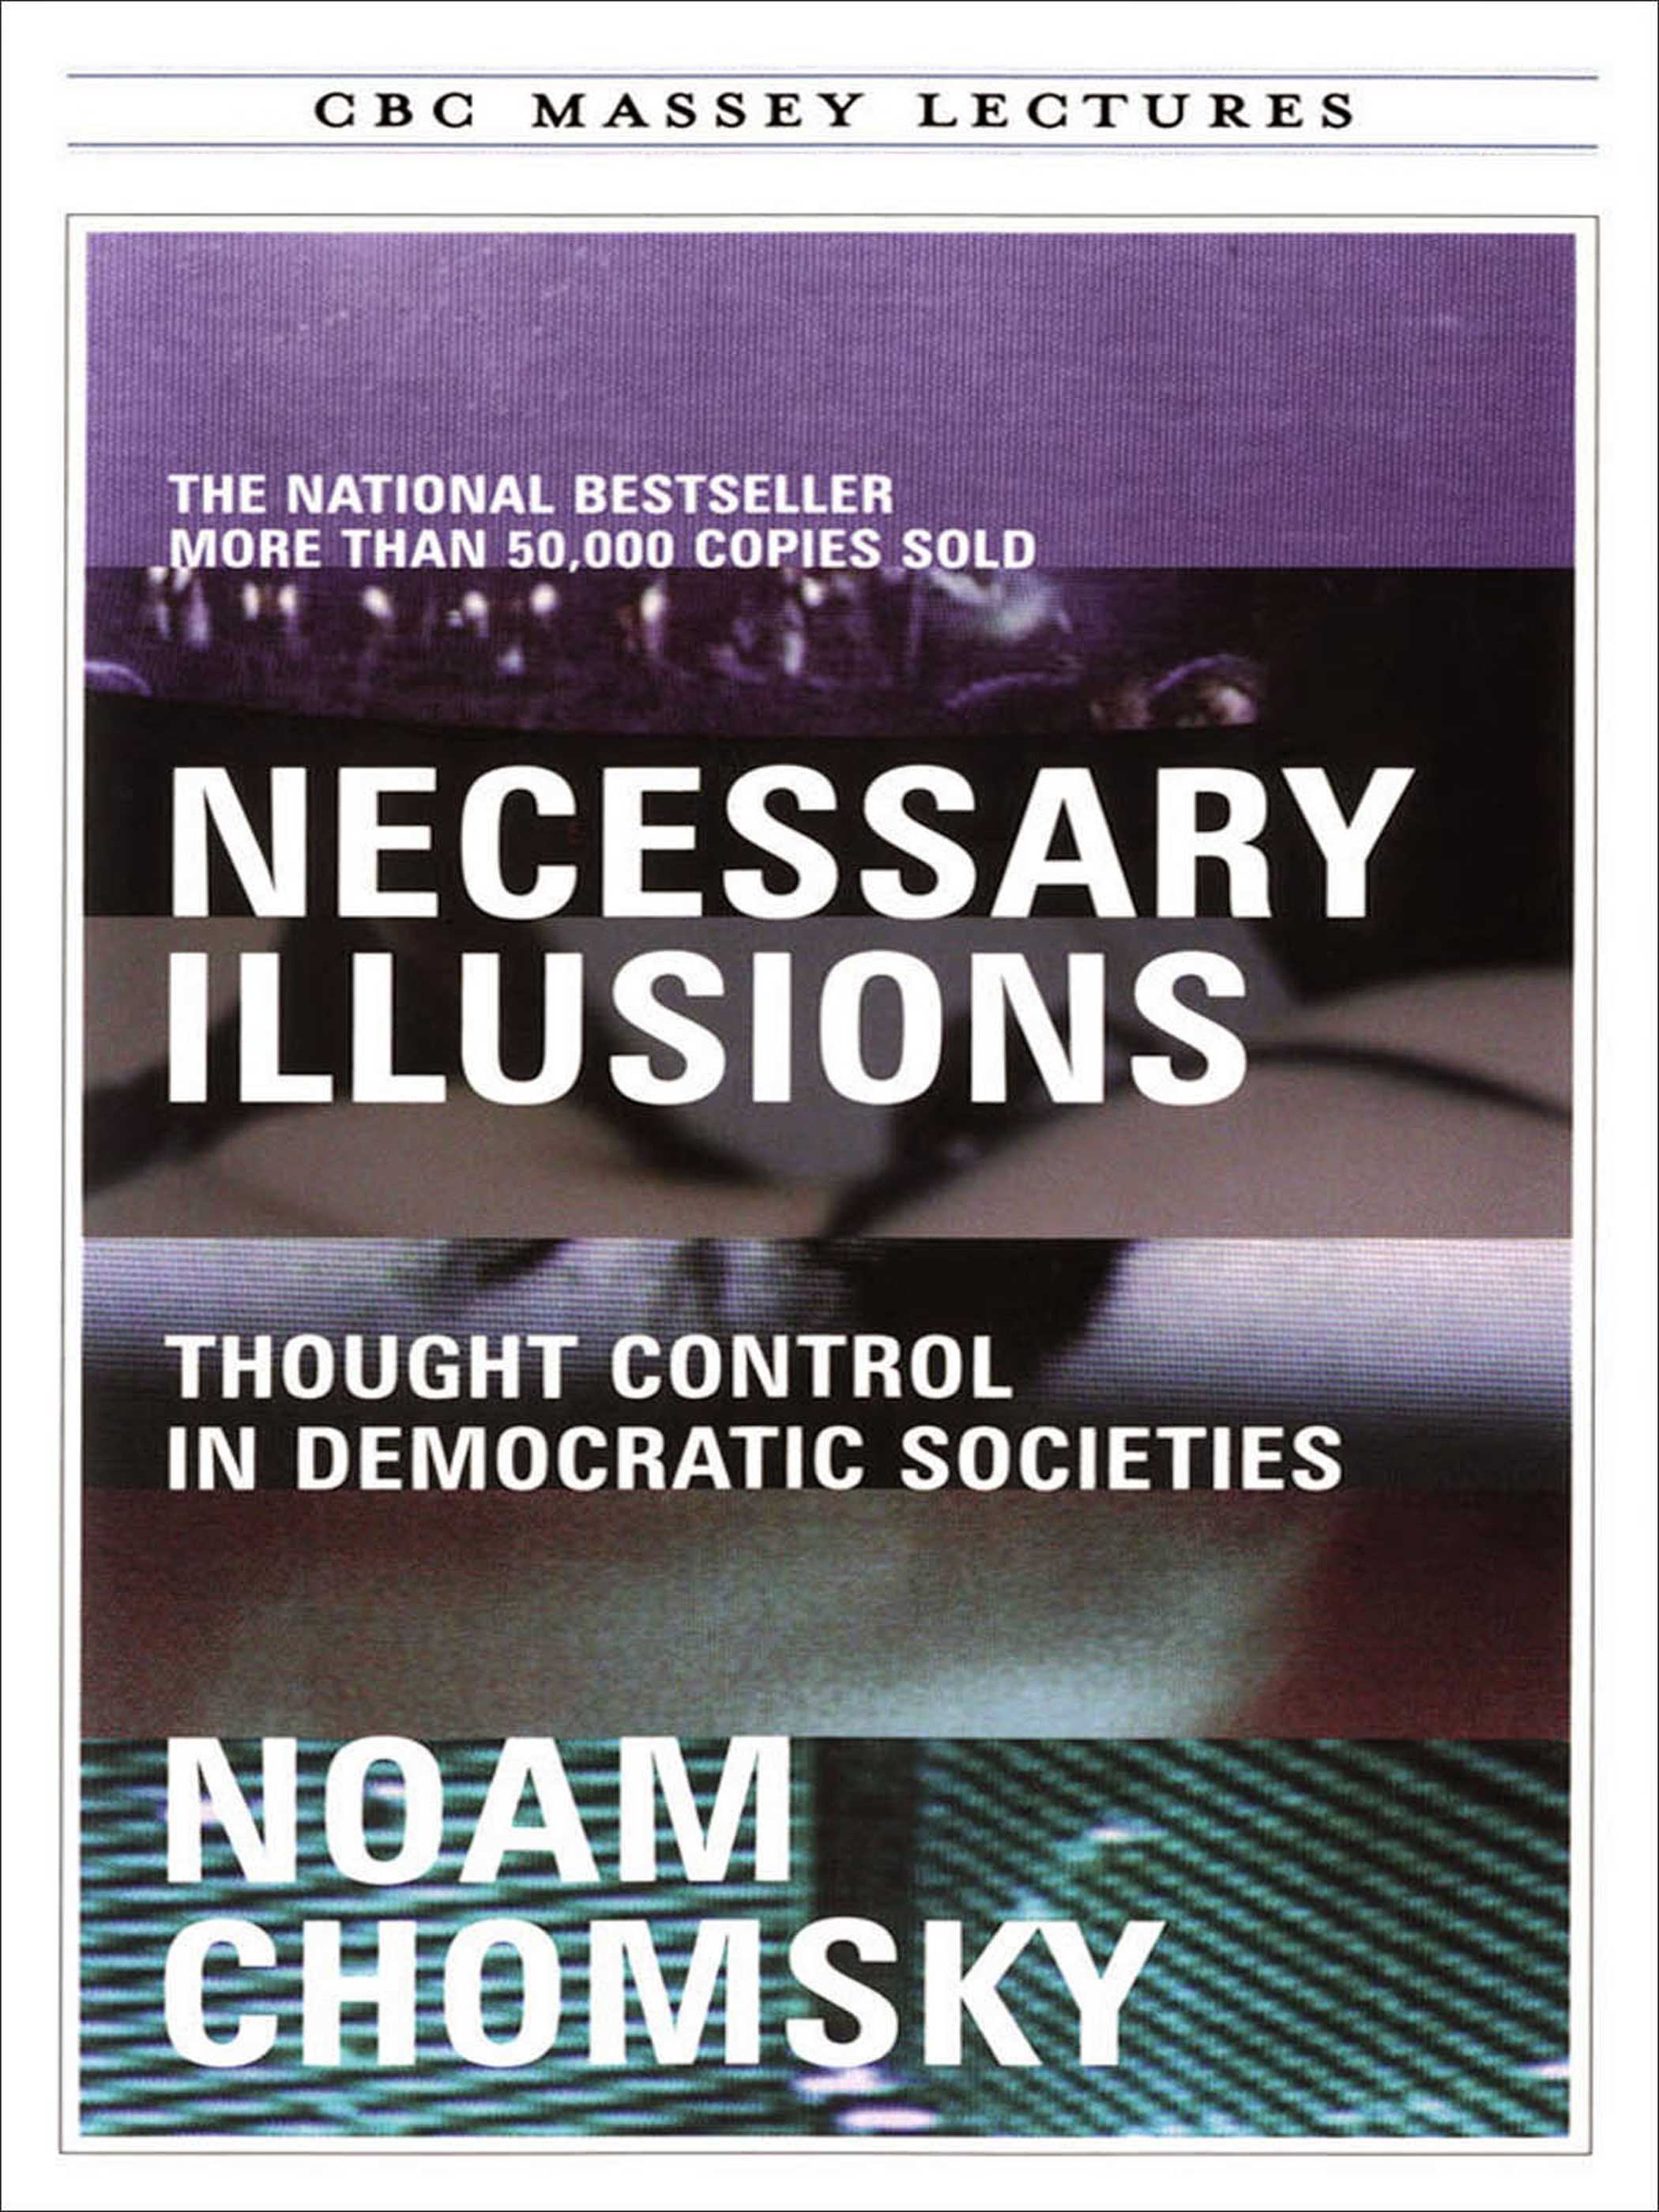 Necessary Illusions: Thought Control in Democratic Societies by Noam Chomsky